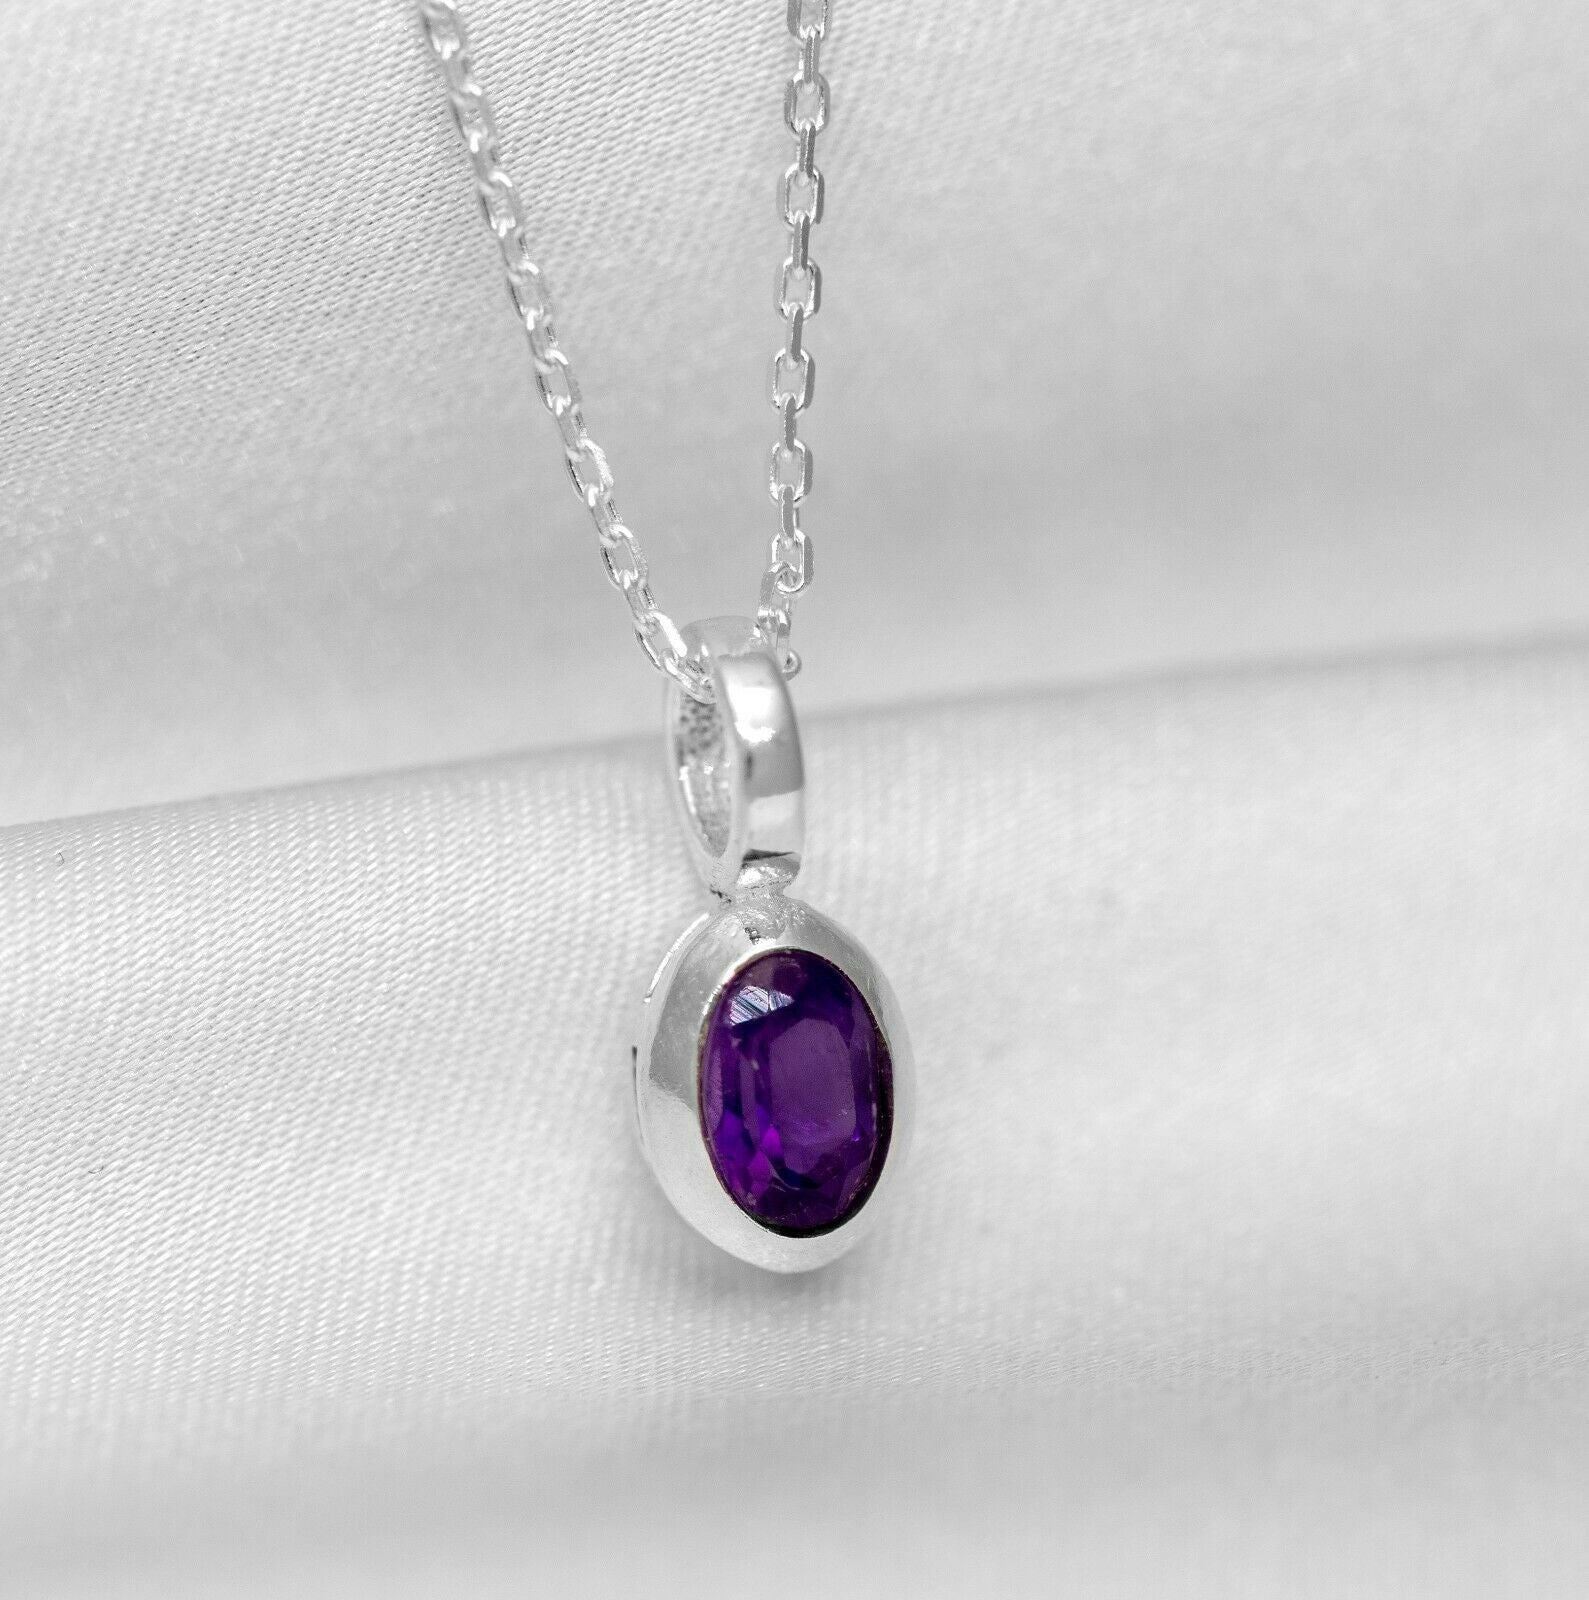 Small Oval Amethyst Sterling 925 Silver Pendant Necklace Ladies Jewellery Gift